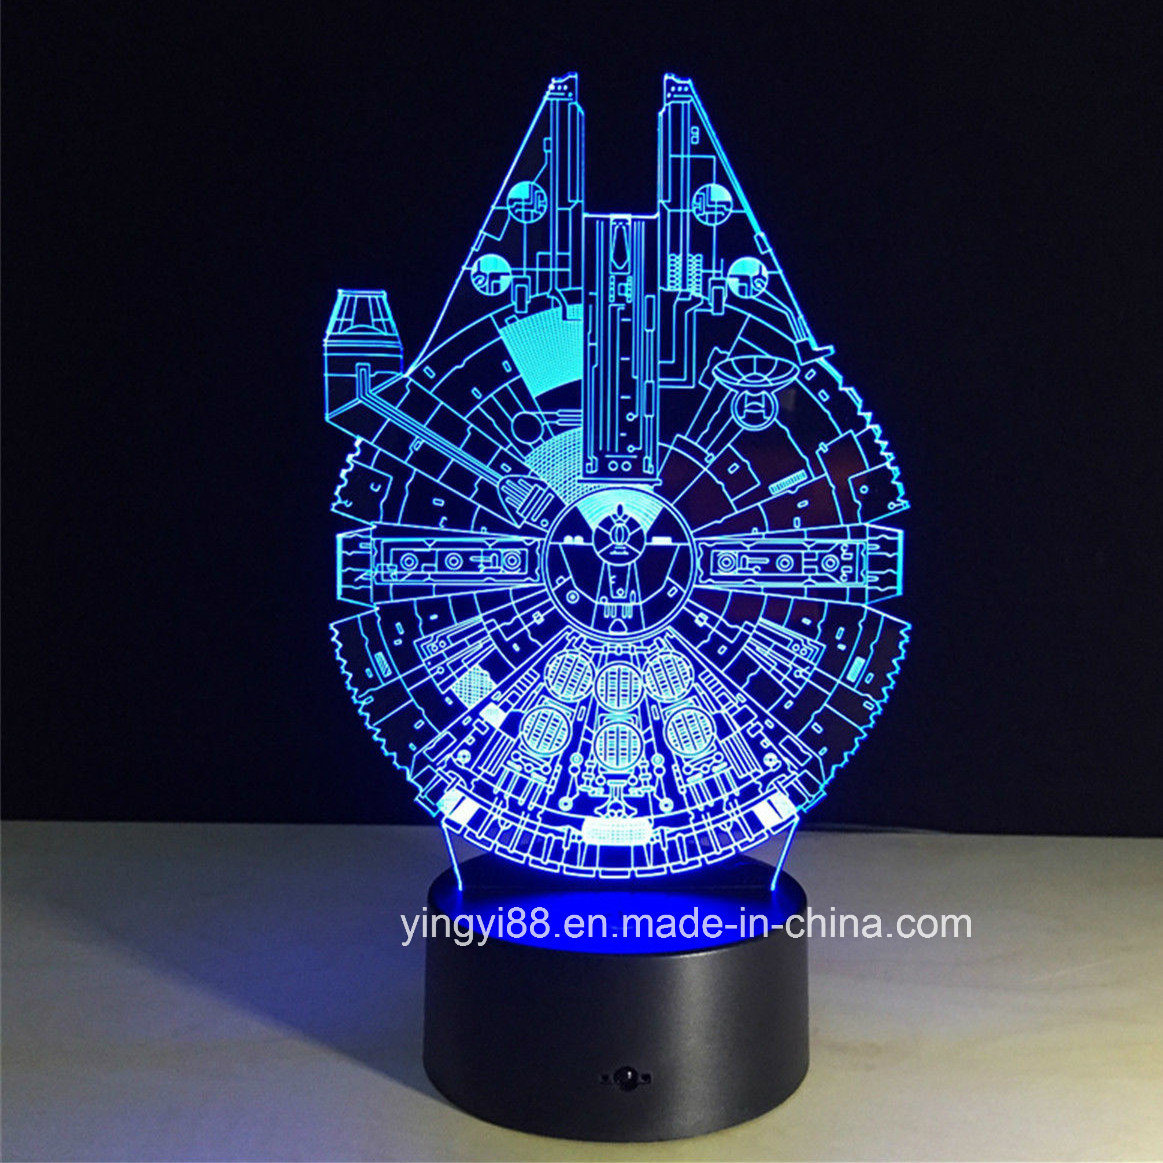 Newest Star Wars 3D Illusion Night Light Color Change Touch Switch Table Desk Lamp